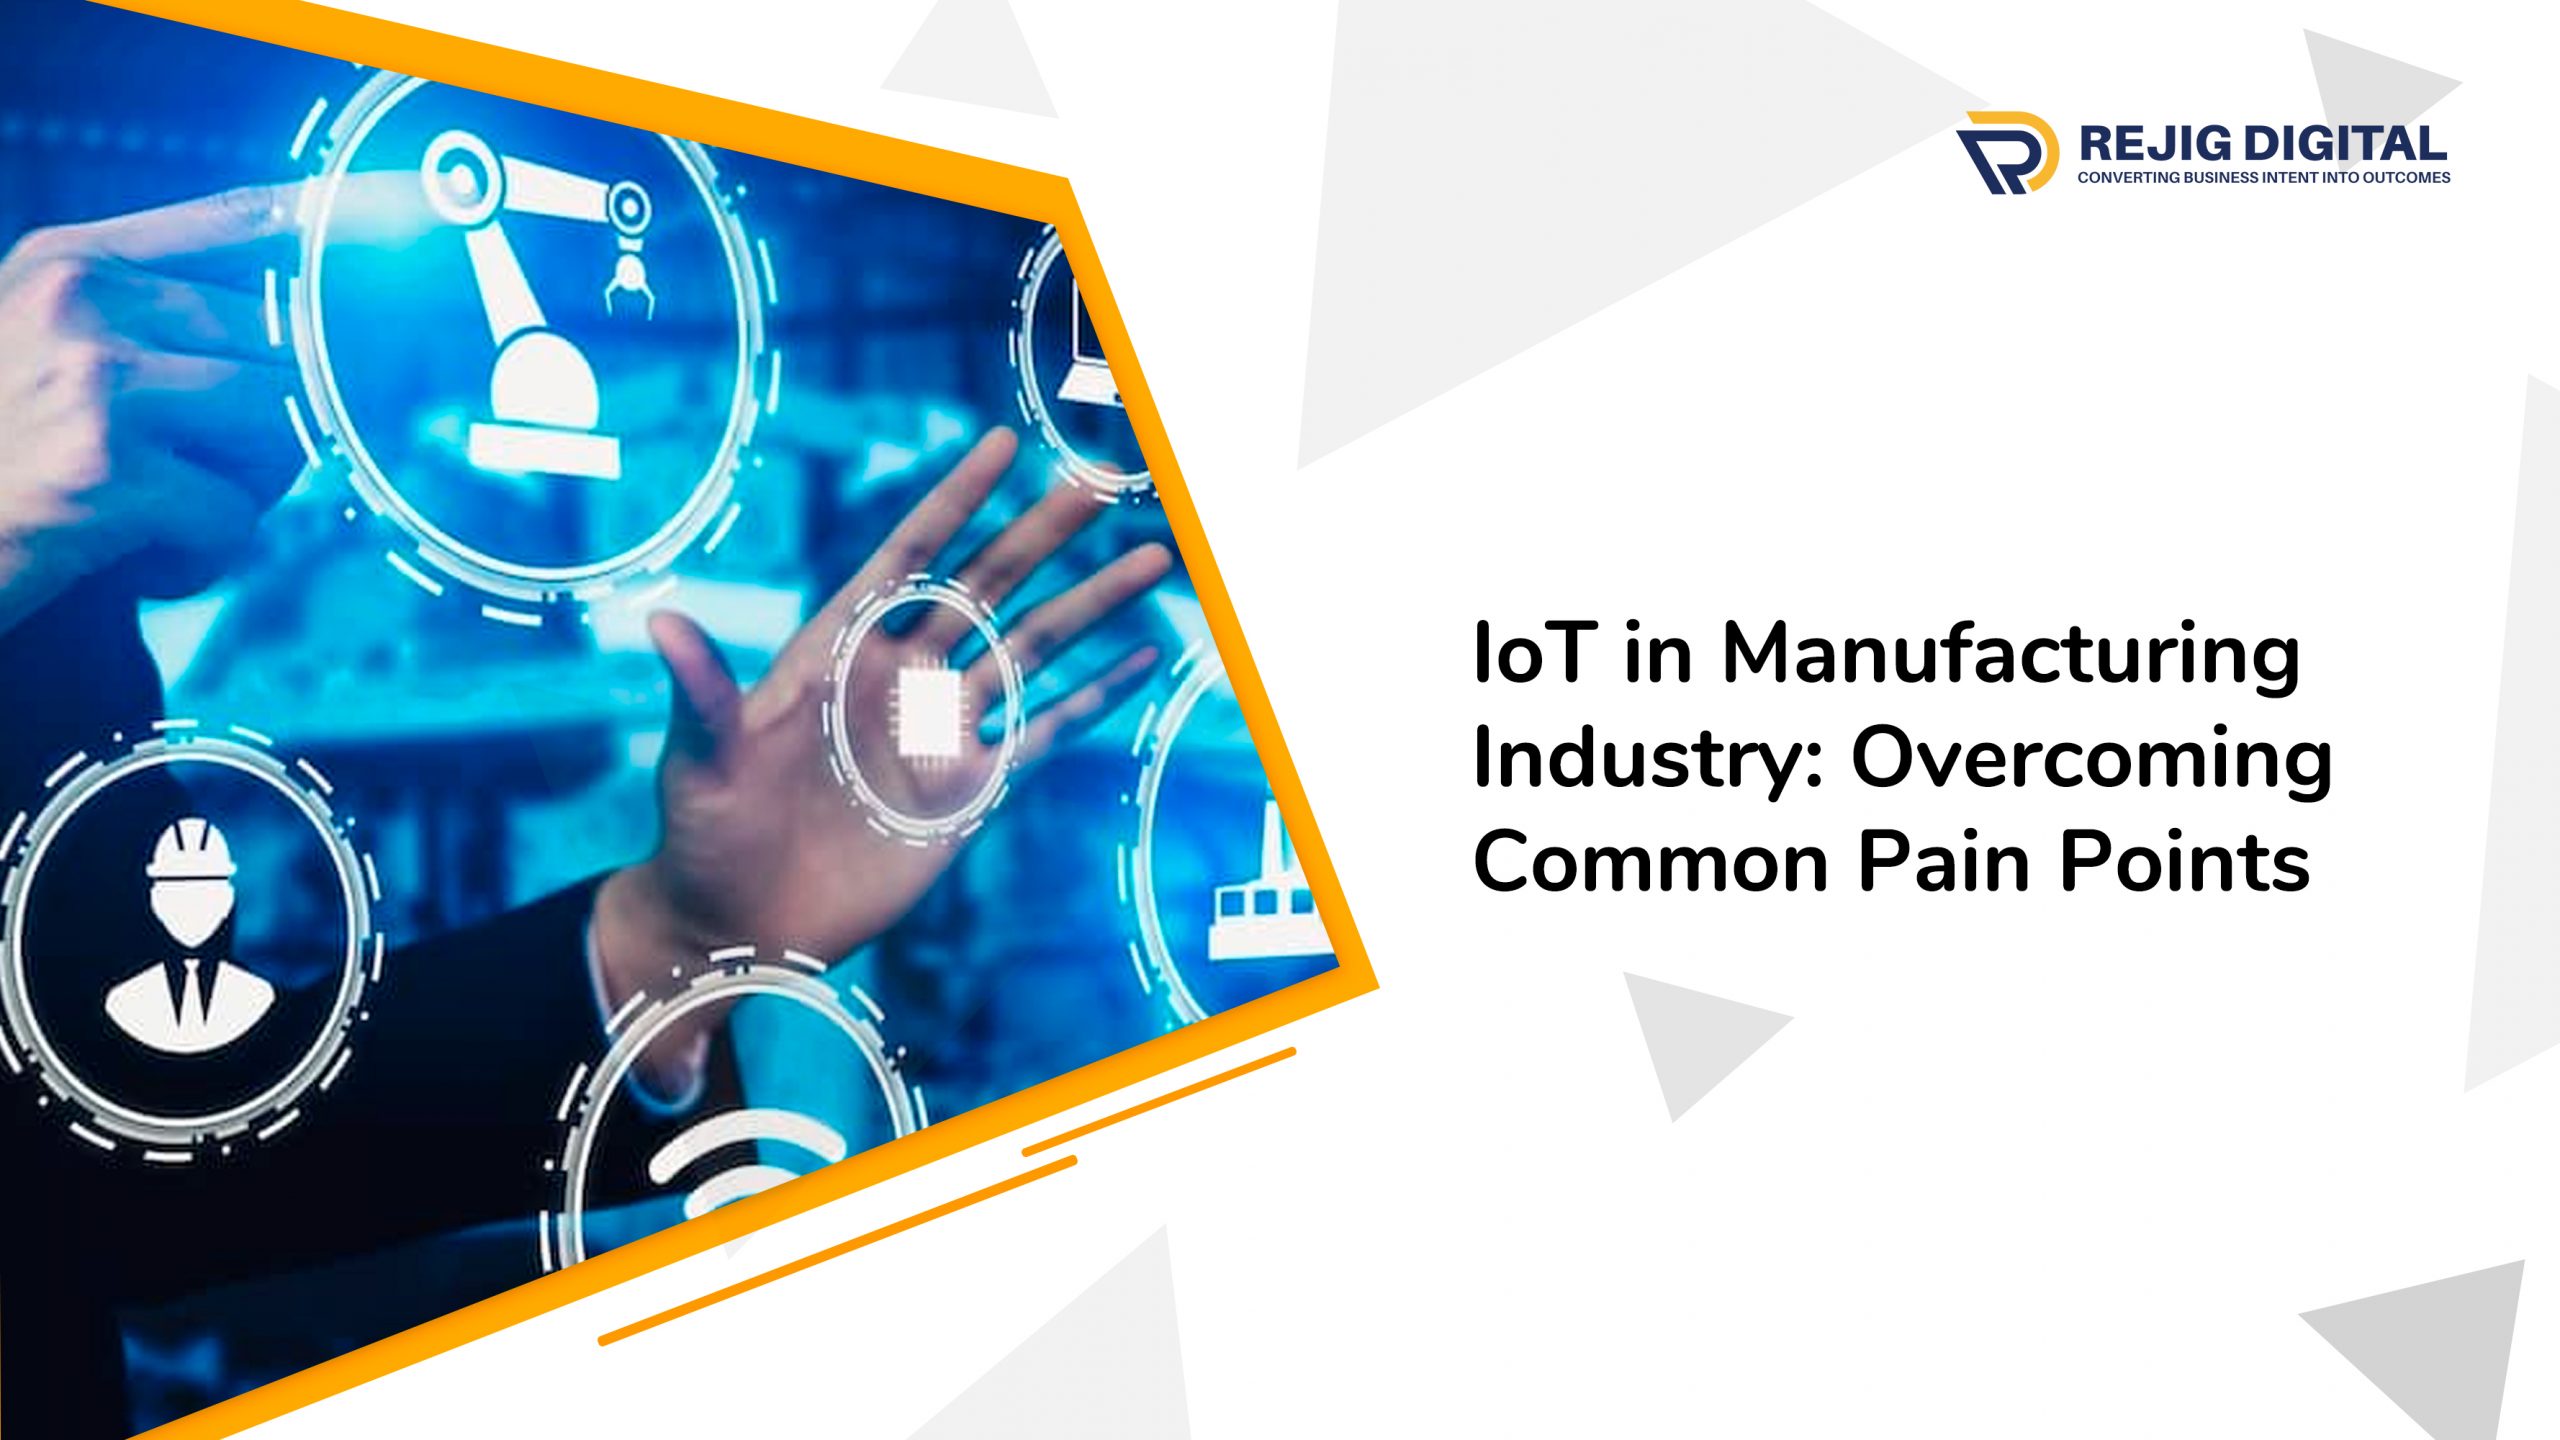 IoT in Manufacturing Industry: Overcoming Common Pain Points